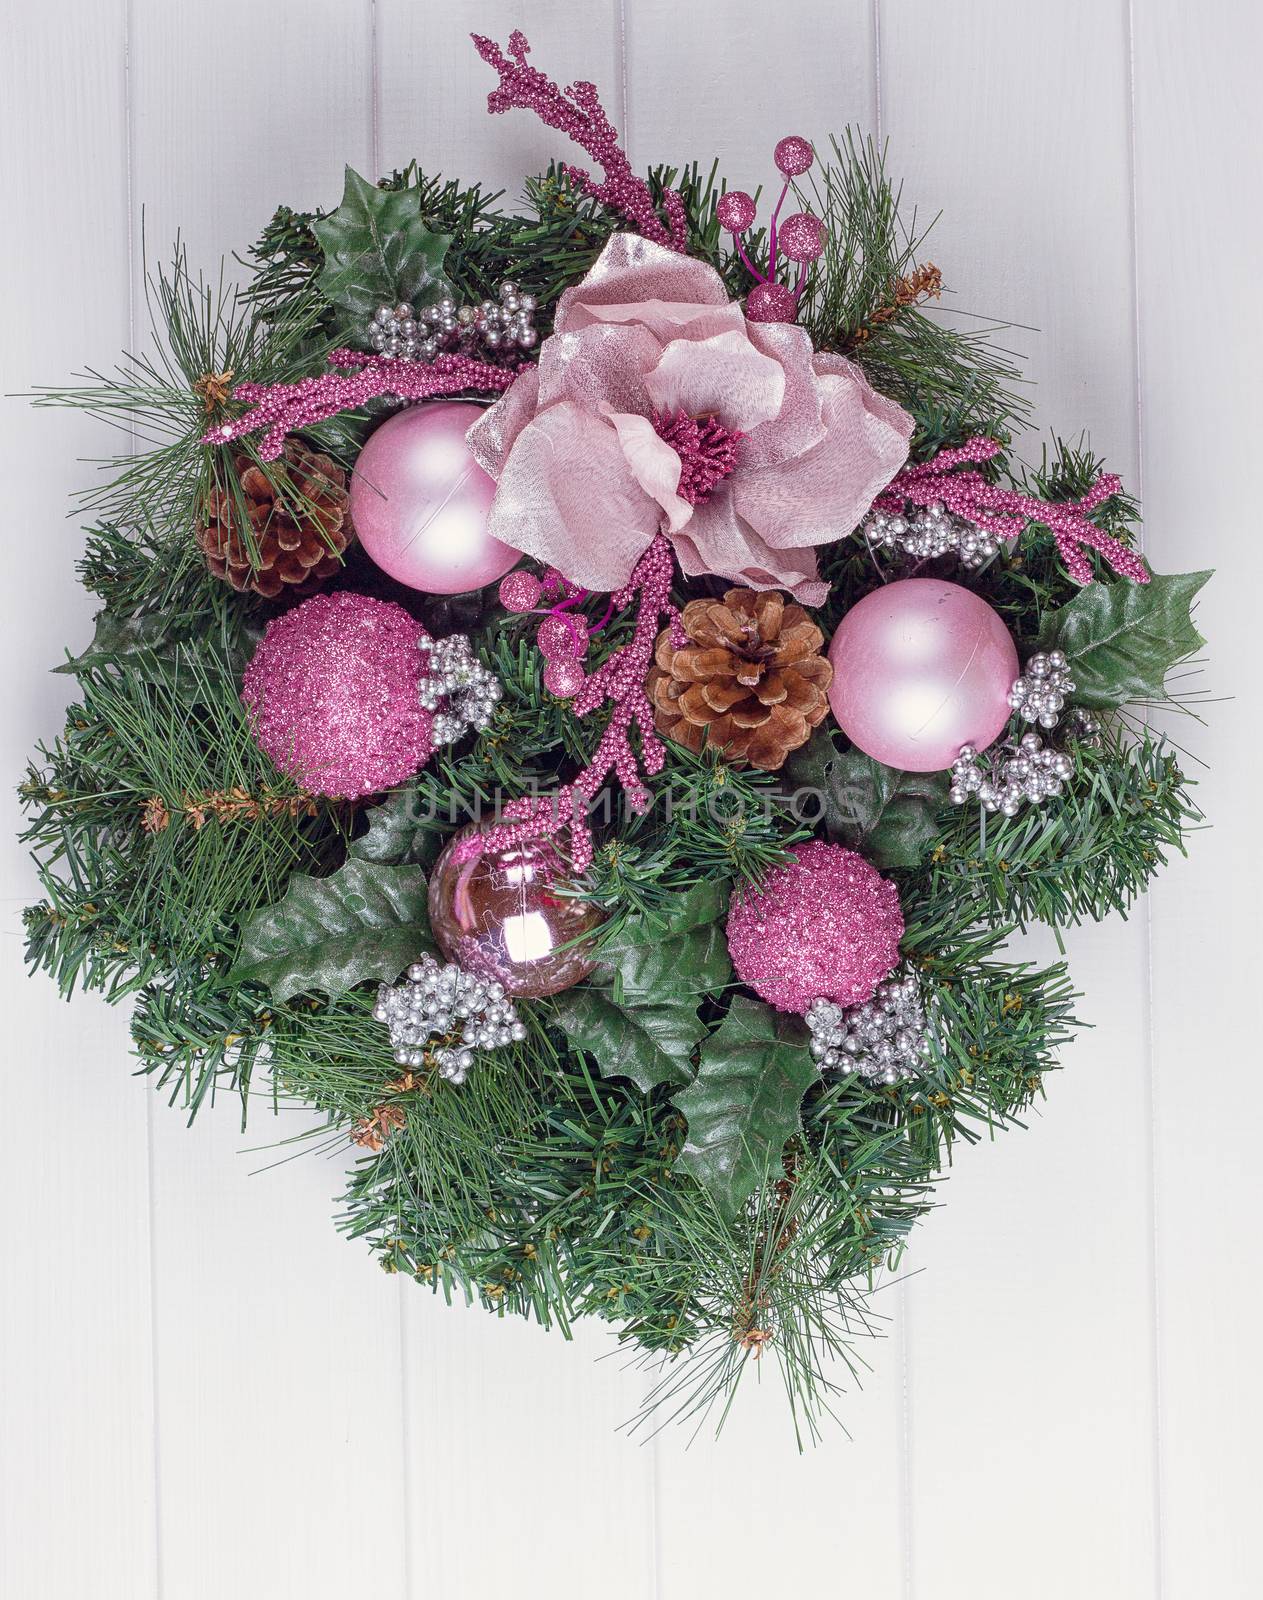 Christmas wreath on a rustic white wooden front door.